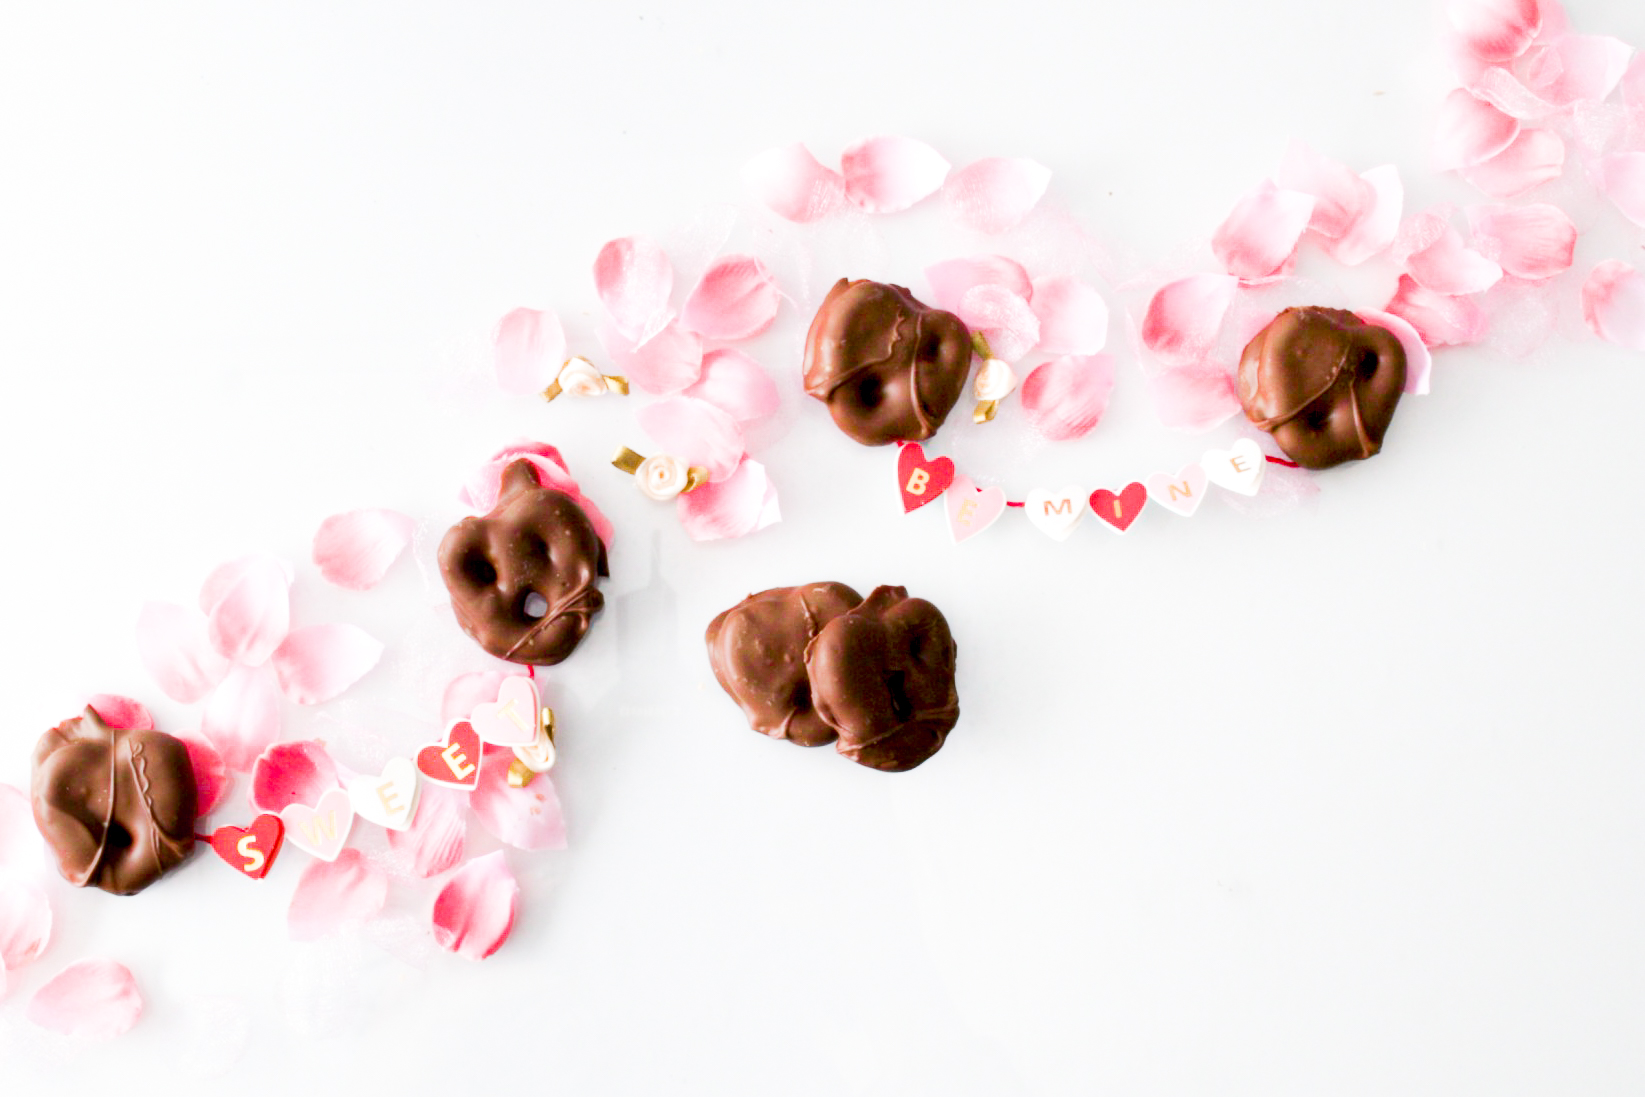 chocolate covered pretzels from hall's candies for Valentine's Day